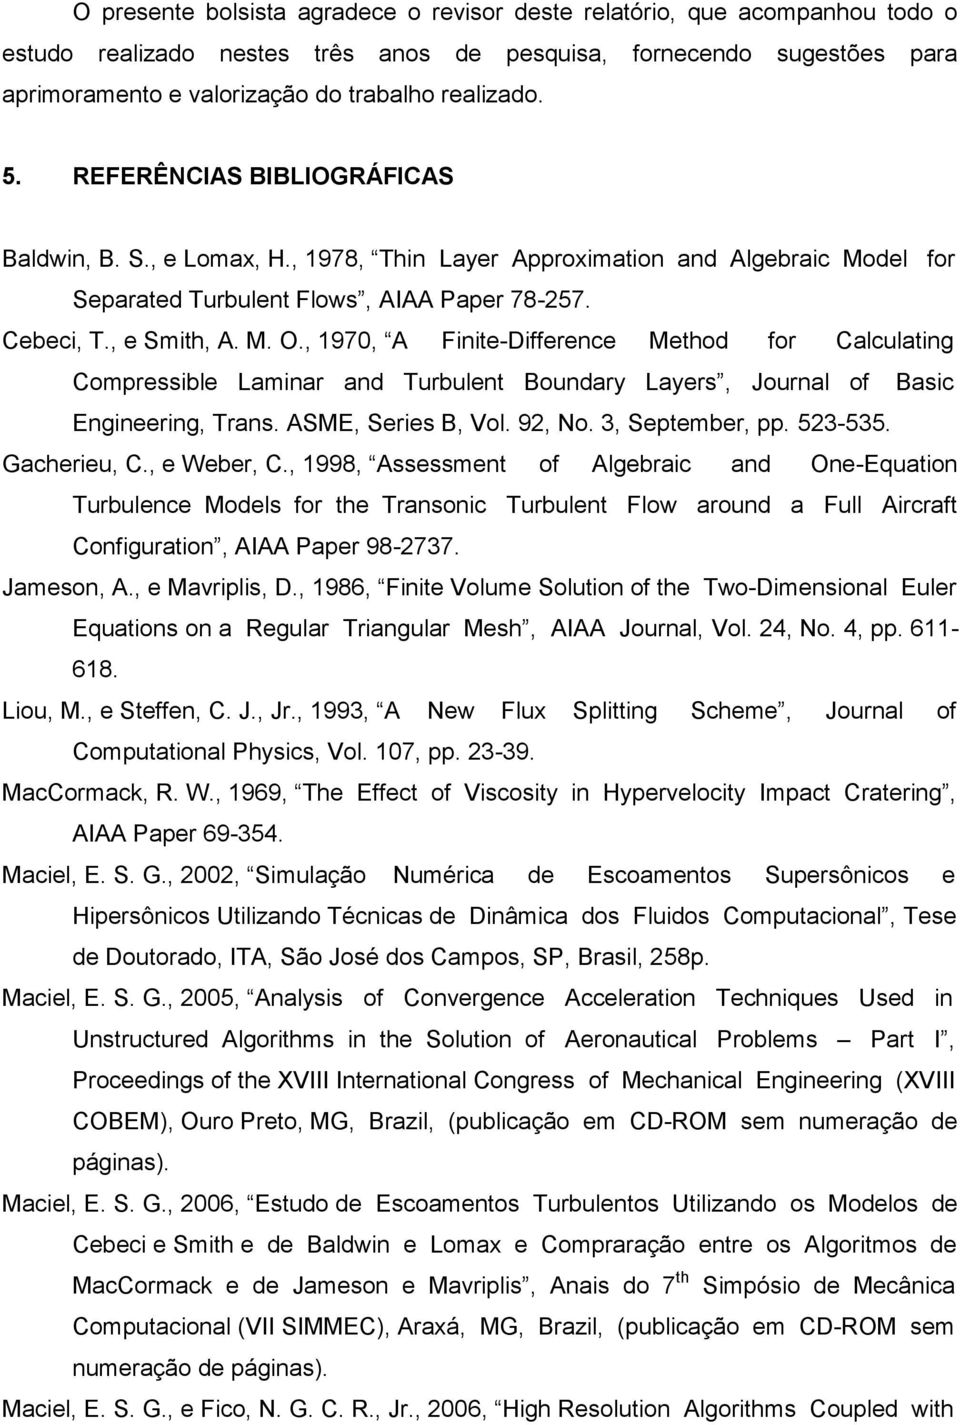 , 1970, A Finite-Difference Method for Calculating Compressible Laminar and Turbulent Boundary Layers, Journal of Basic Engineering, Trans. ASME, Series B, Vol. 92, No. 3, September, pp. 523-535.